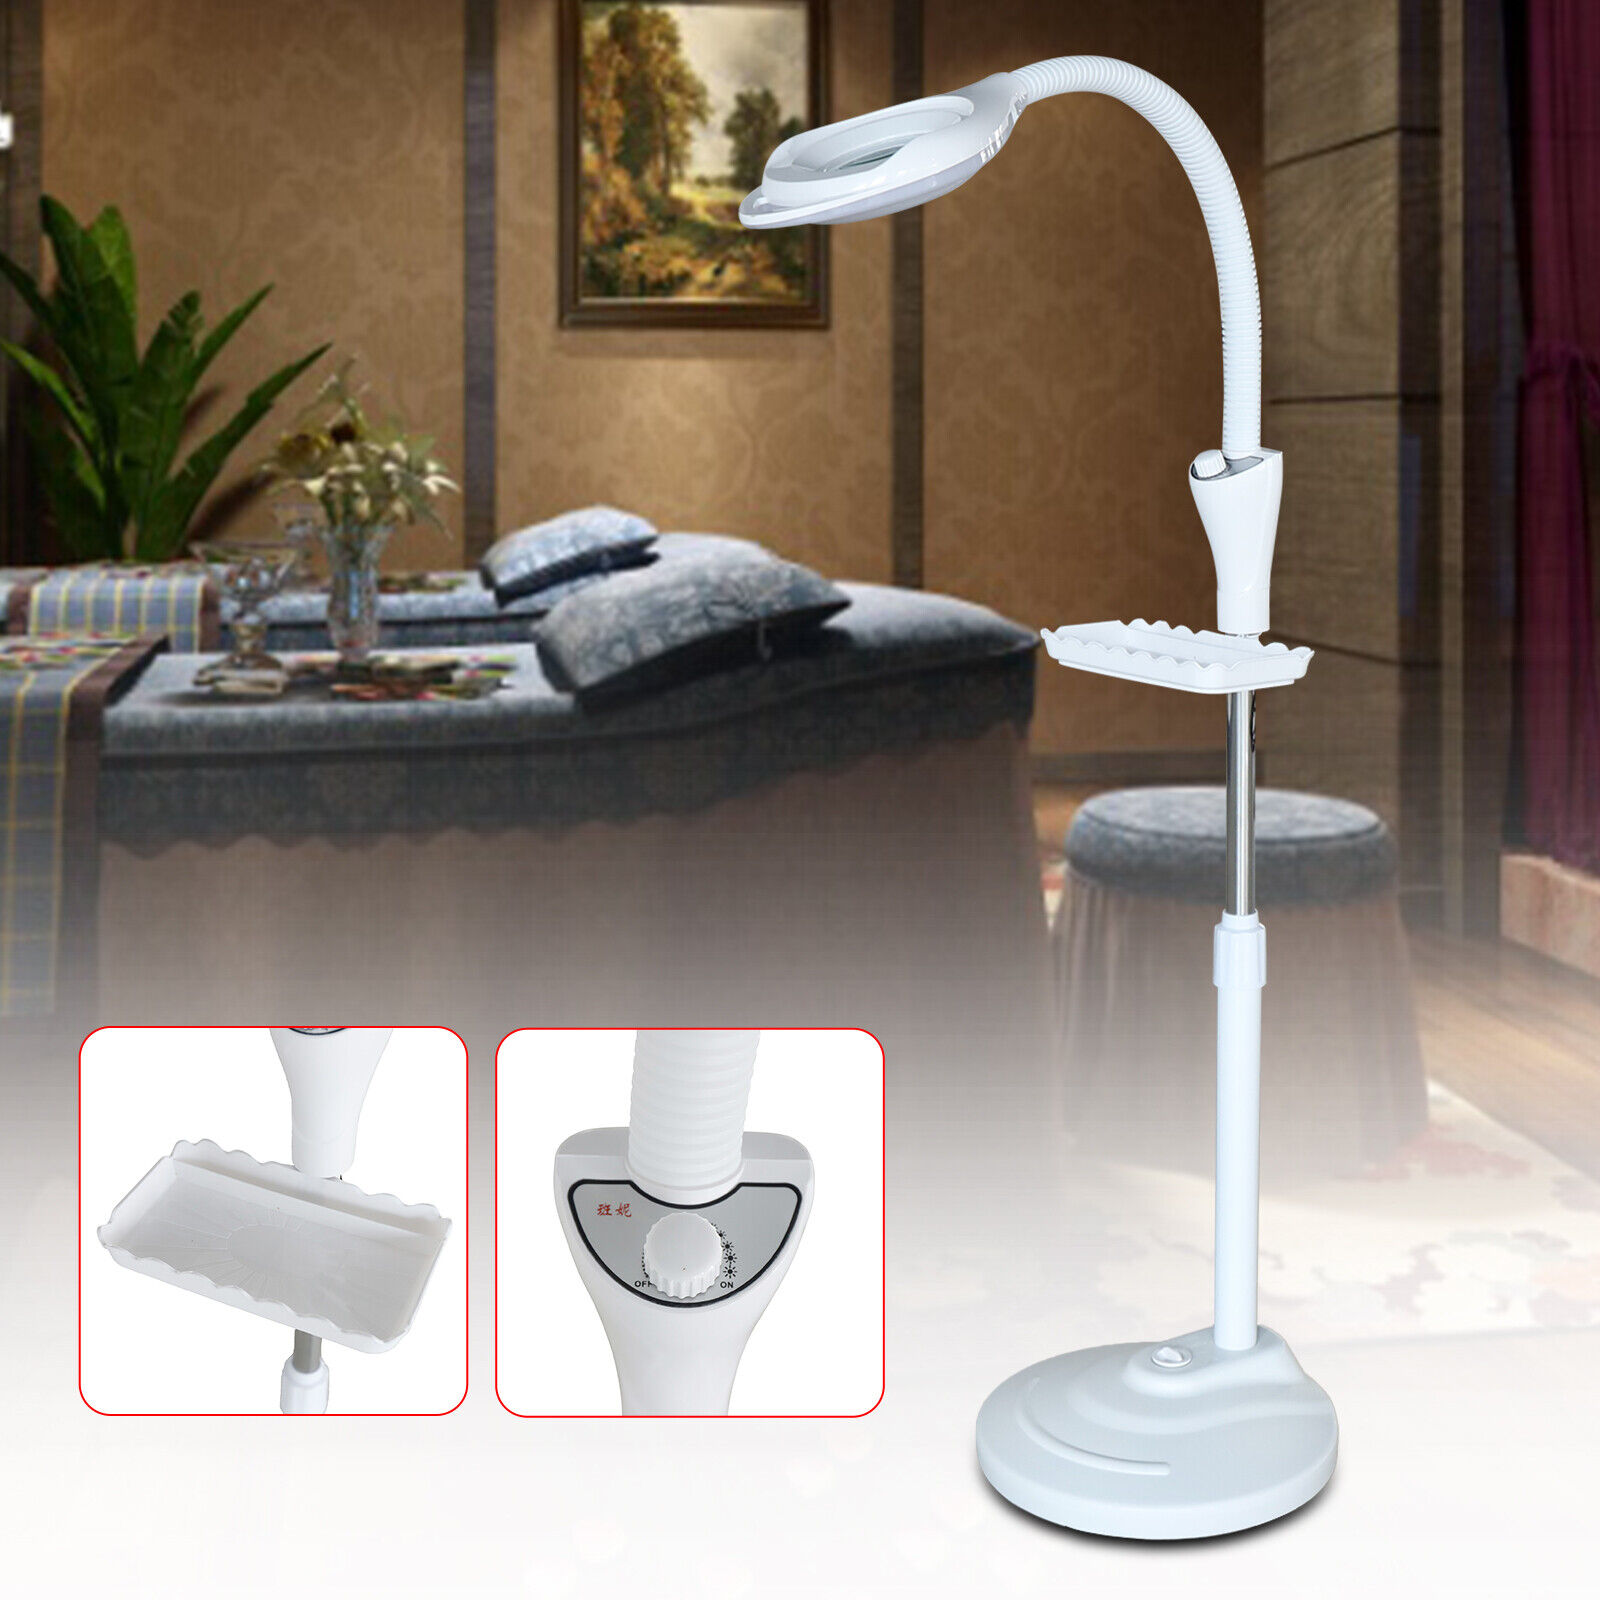 16x Diopter Led Facial Magnifying Floor Stand Lamp Lens Light Beauty Magnifier